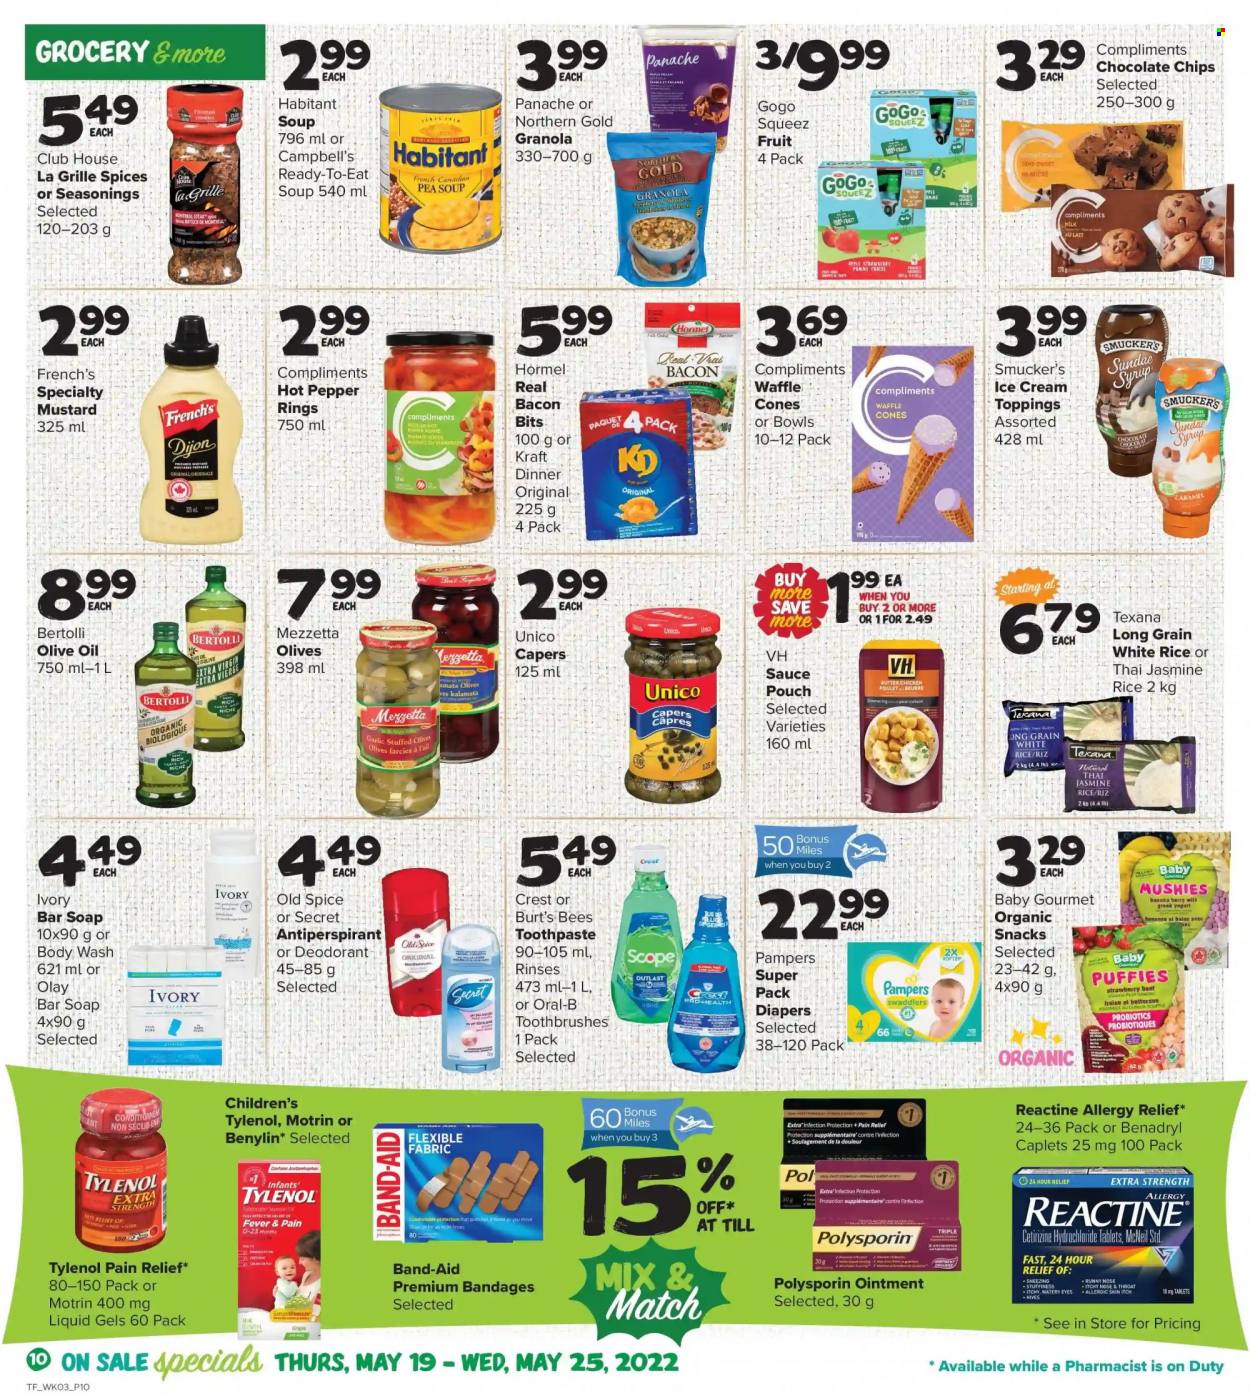 thumbnail - Thrifty Foods Flyer - May 19, 2022 - May 25, 2022 - Sales products - Campbell's, soup, sauce, Kraft®, Bertolli, Hormel, bacon, yoghurt, milk, ice cream, snack, capers, jasmine rice, white rice, spice, caramel, mustard, extra virgin olive oil, olive oil, oil, syrup, nappies, ointment, body wash, soap bar, soap, toothpaste, Crest, Olay, anti-perspirant, pain relief, Tylenol, probiotics, Benylin, allergy relief, Motrin, band-aid, granola, Pampers, Old Spice, olives, Oral-B, steak, deodorant. Page 10.